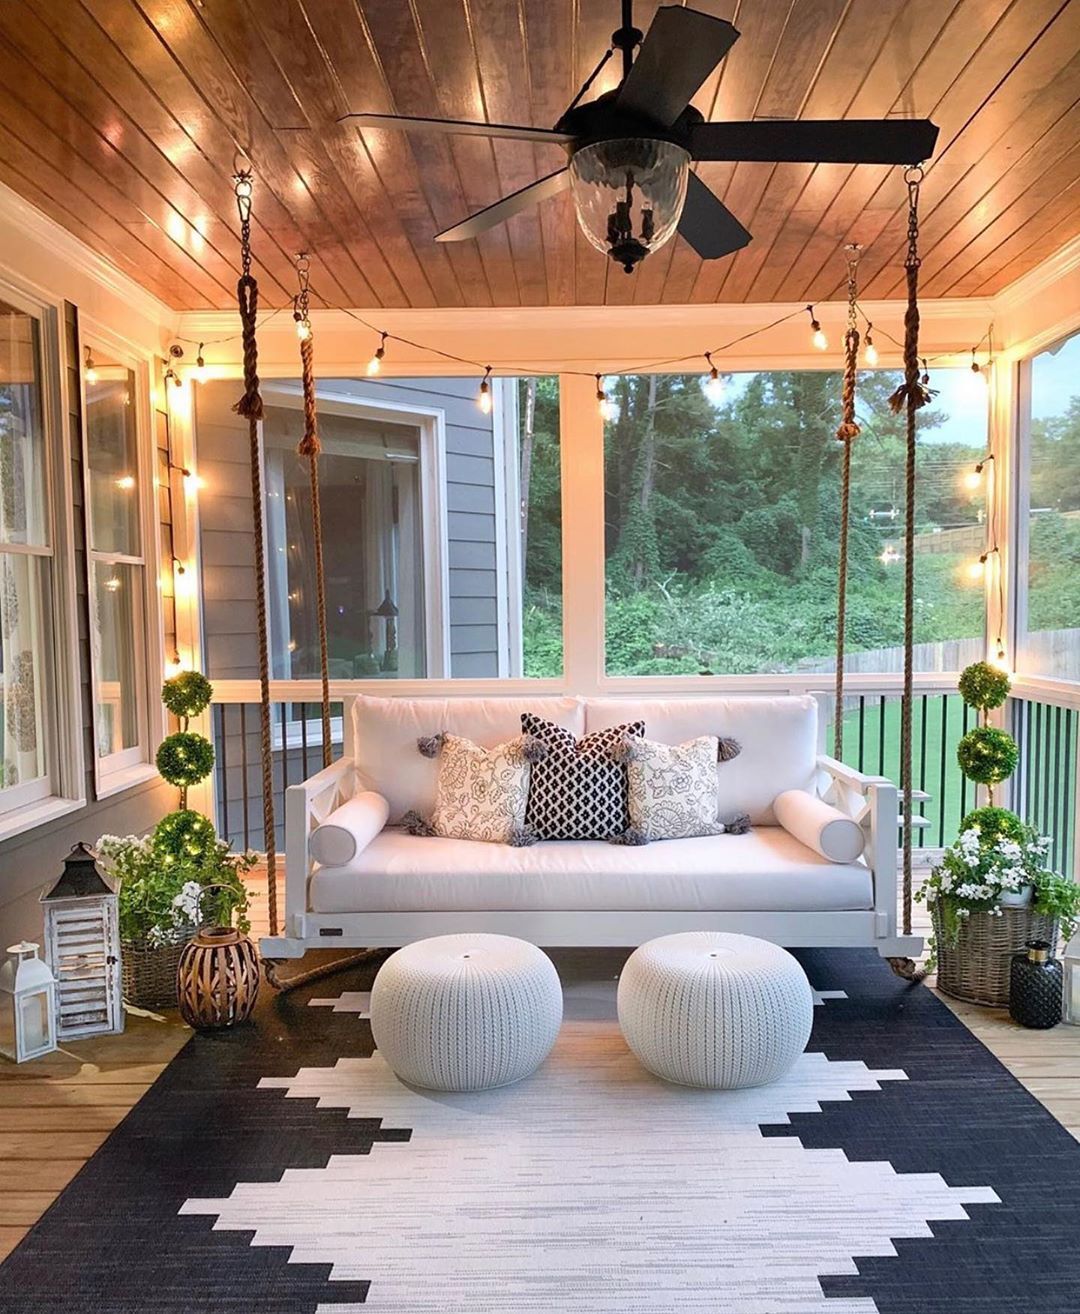 Porch Swing Plans & Ideas to Chill in Your Front Porch